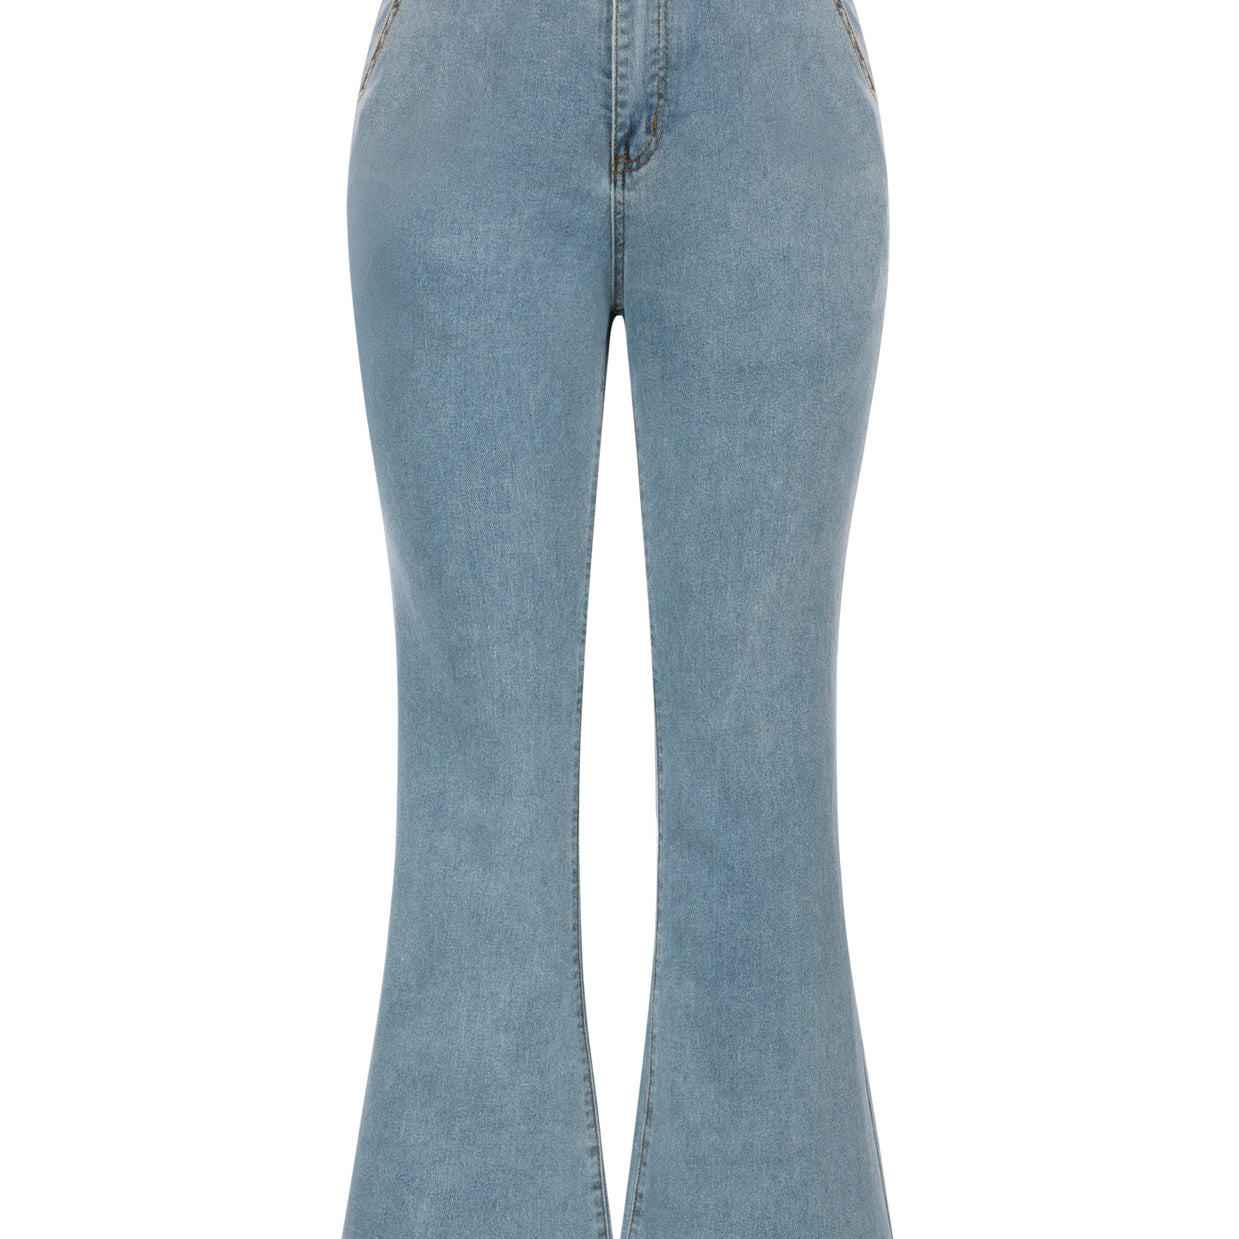 Vintage High Waisted Flare Jeans with Belt Bootcut Stretchy Denim Pants